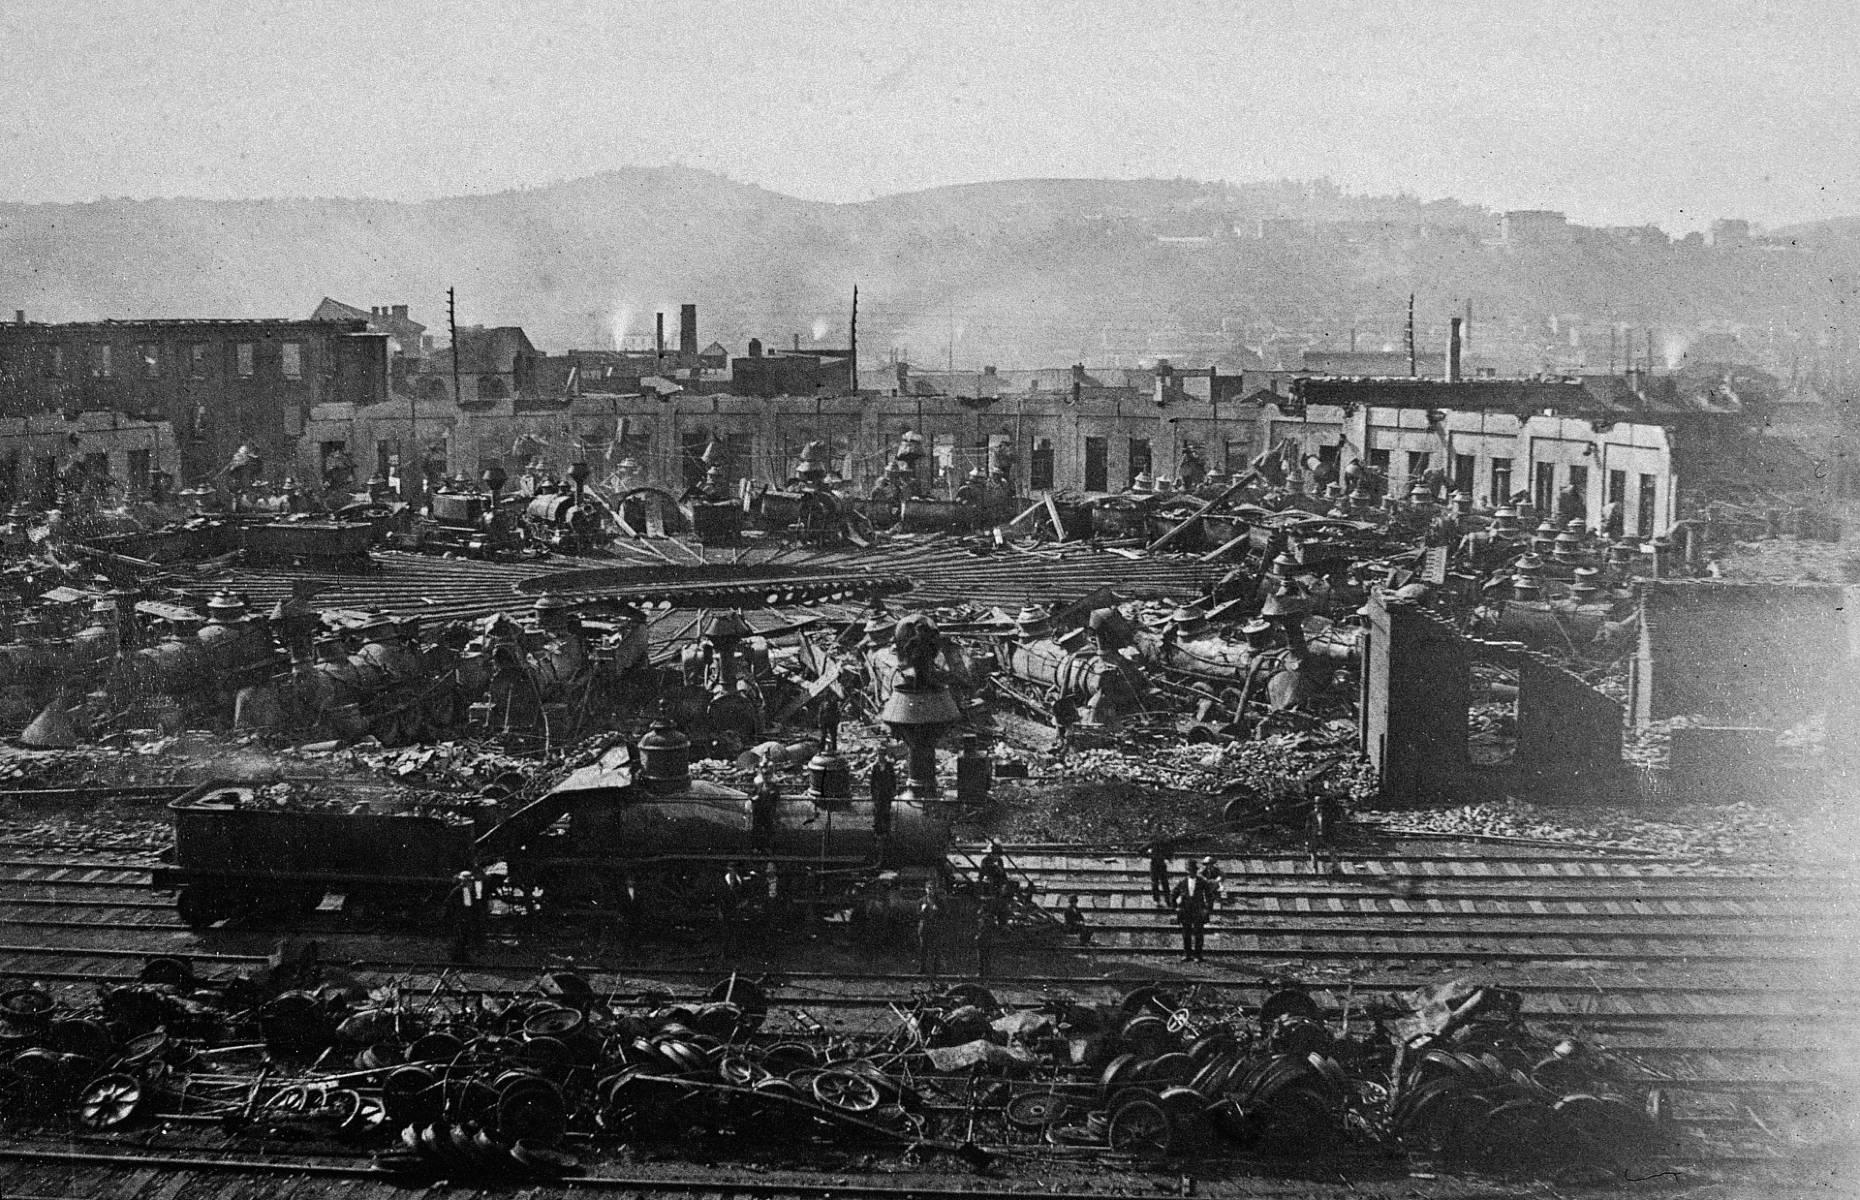 <p>Railway work was poorly paid and dangerous, but that didn’t stop bosses trying to squeeze wages even lower. In 1877, workers snapped and went on strike and the heavy-handed government response was to send in the troops. The deaths of 20 strikers in Pittsburgh helped cause a riot that targeted railway property. The damage was substantial – as seen in this picture of the destruction at the Pennsylvania Railroad Roundhouse – but the riots eventually petered out and the strikers were forced to return to work with no pay rise.</p>  <p><strong>Liking this? Click on the Follow button above for more great stories from loveEXPLORING</strong></p>